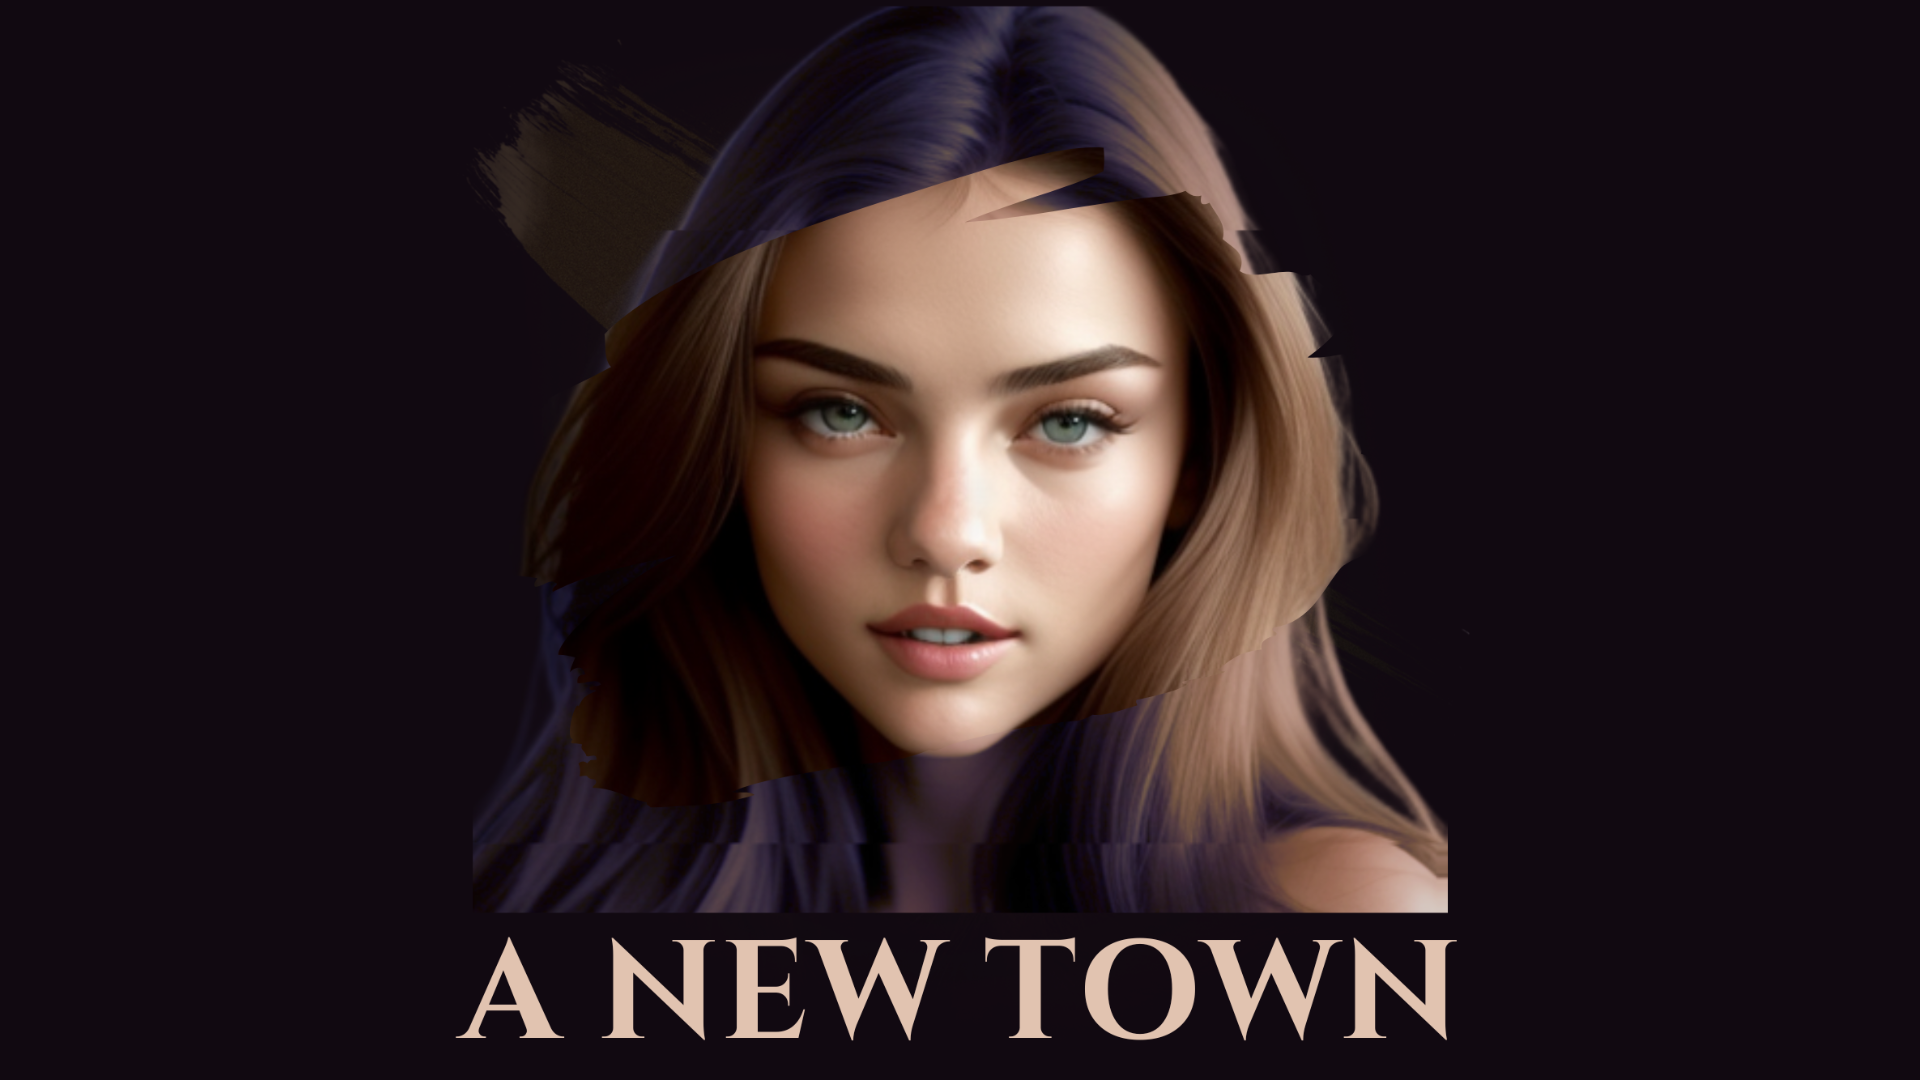 A new town